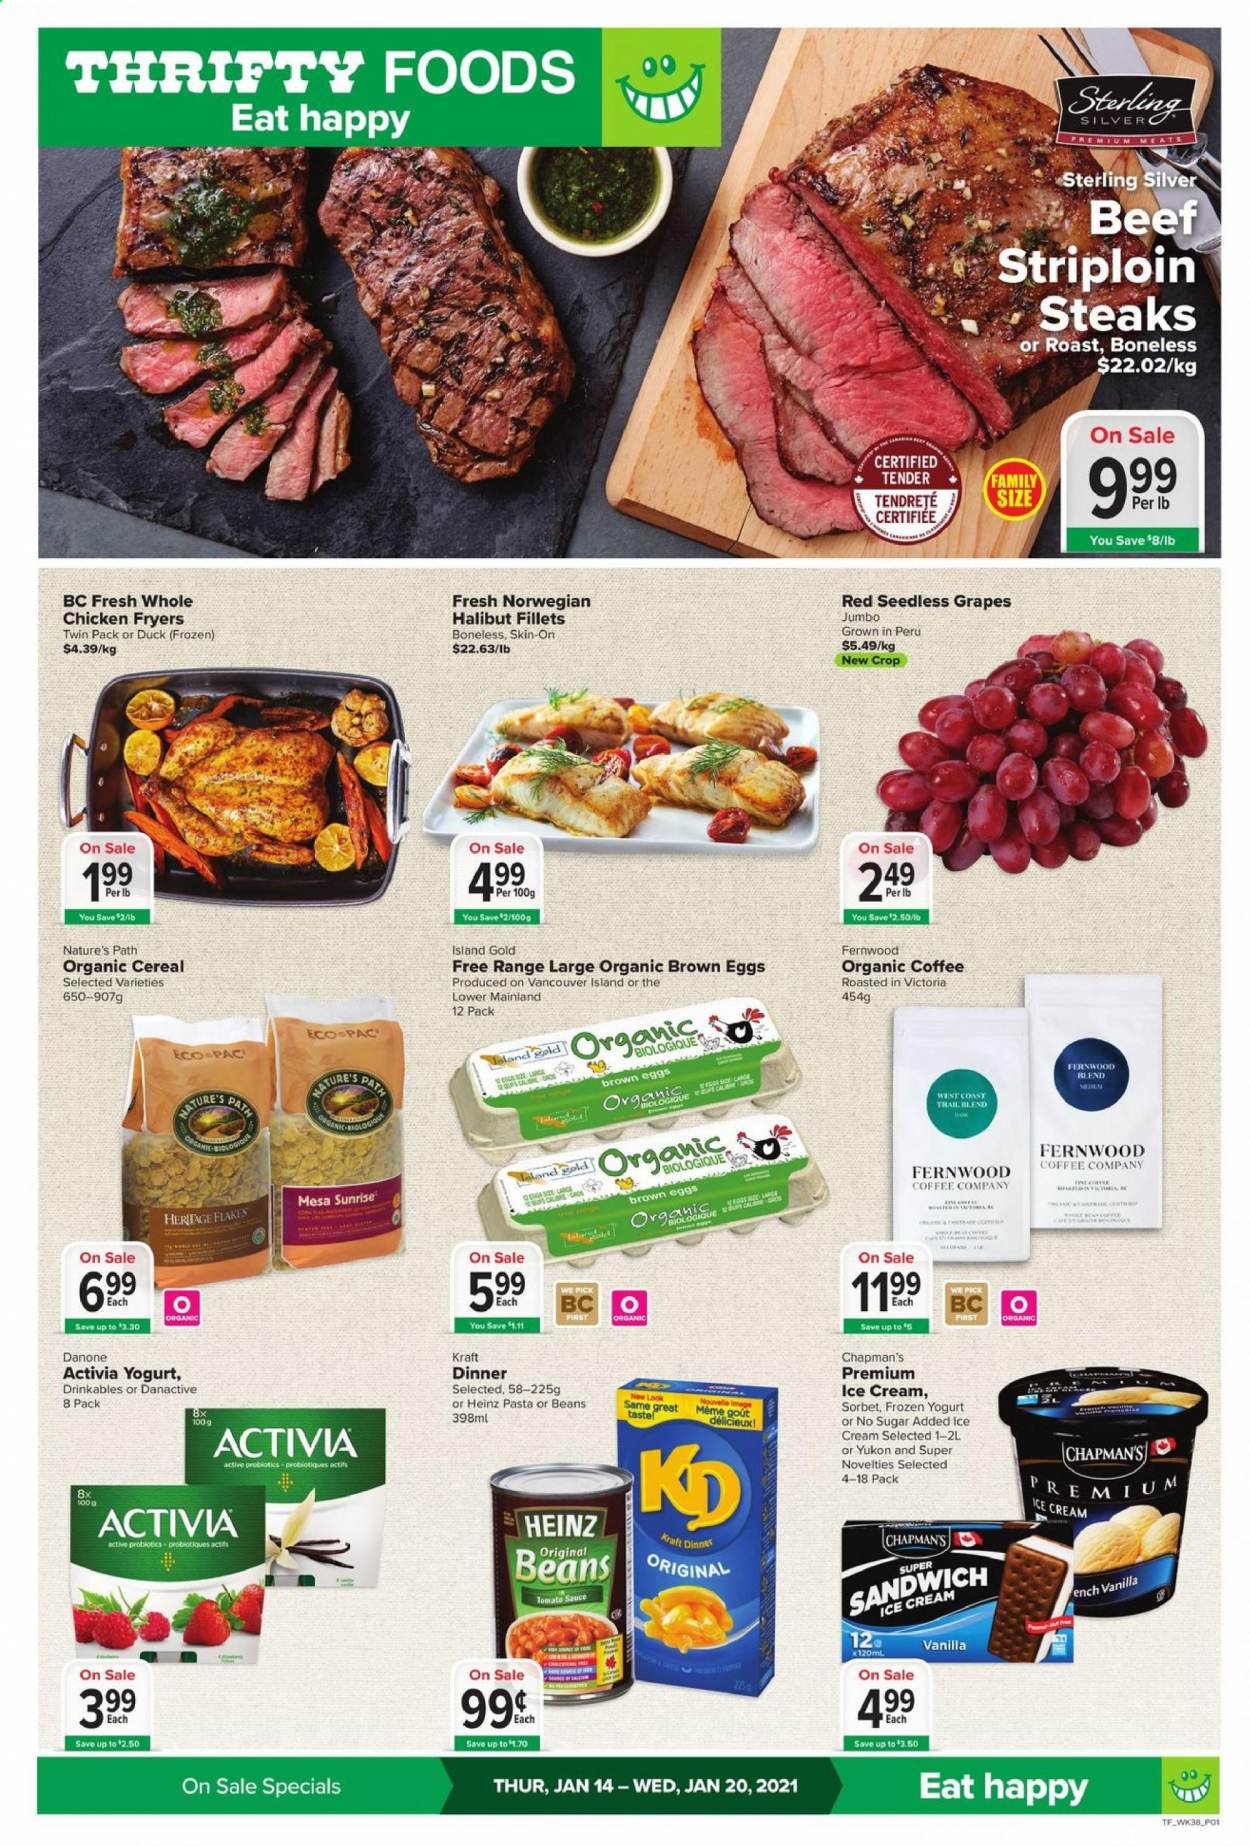 thumbnail - Thrifty Foods Flyer - January 14, 2021 - January 20, 2021 - Sales products - grapes, seedless grapes, halibut, sandwich, pasta, sauce, Kraft®, ready meal, Activia, eggs, ice cream, frozen yoghurt, sorbet, tomato sauce, organic coffee, whole chicken, chicken, poultry meat, beef meat, steak, striploin steak, probiotics, Heinz, Danone. Page 1.